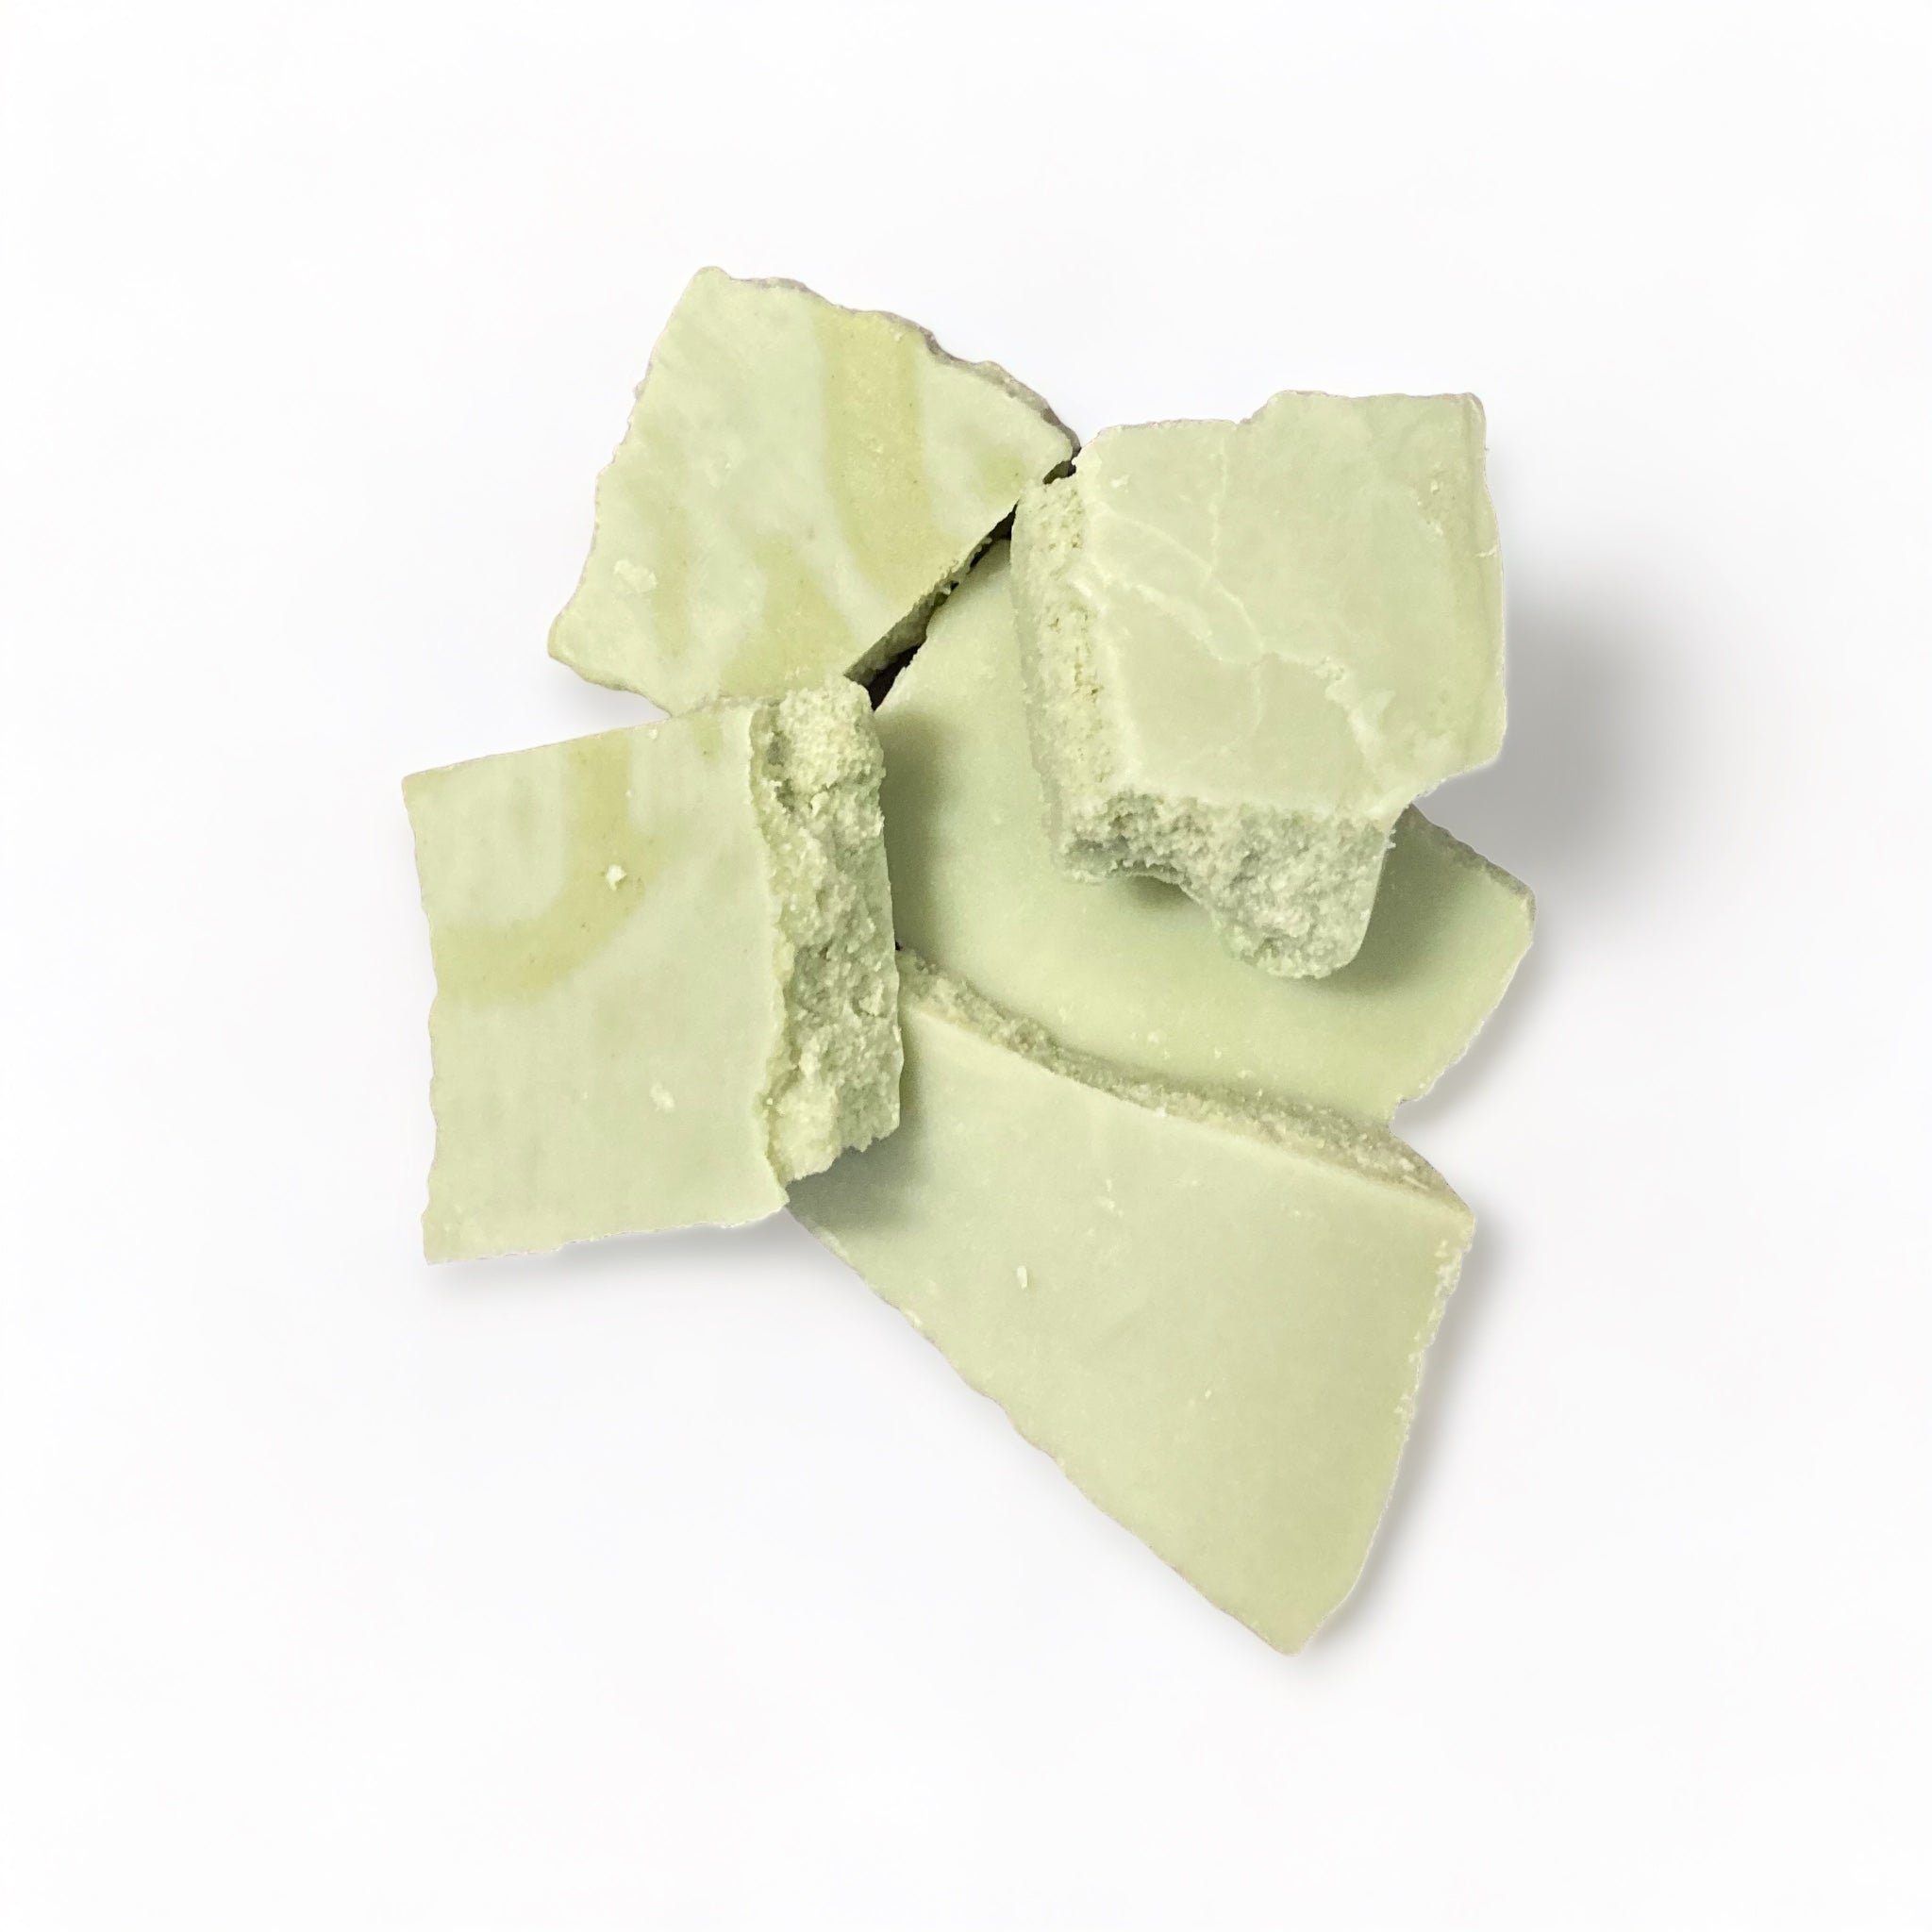 Pale green soy wax in bark form in Pear fragrance on a white background